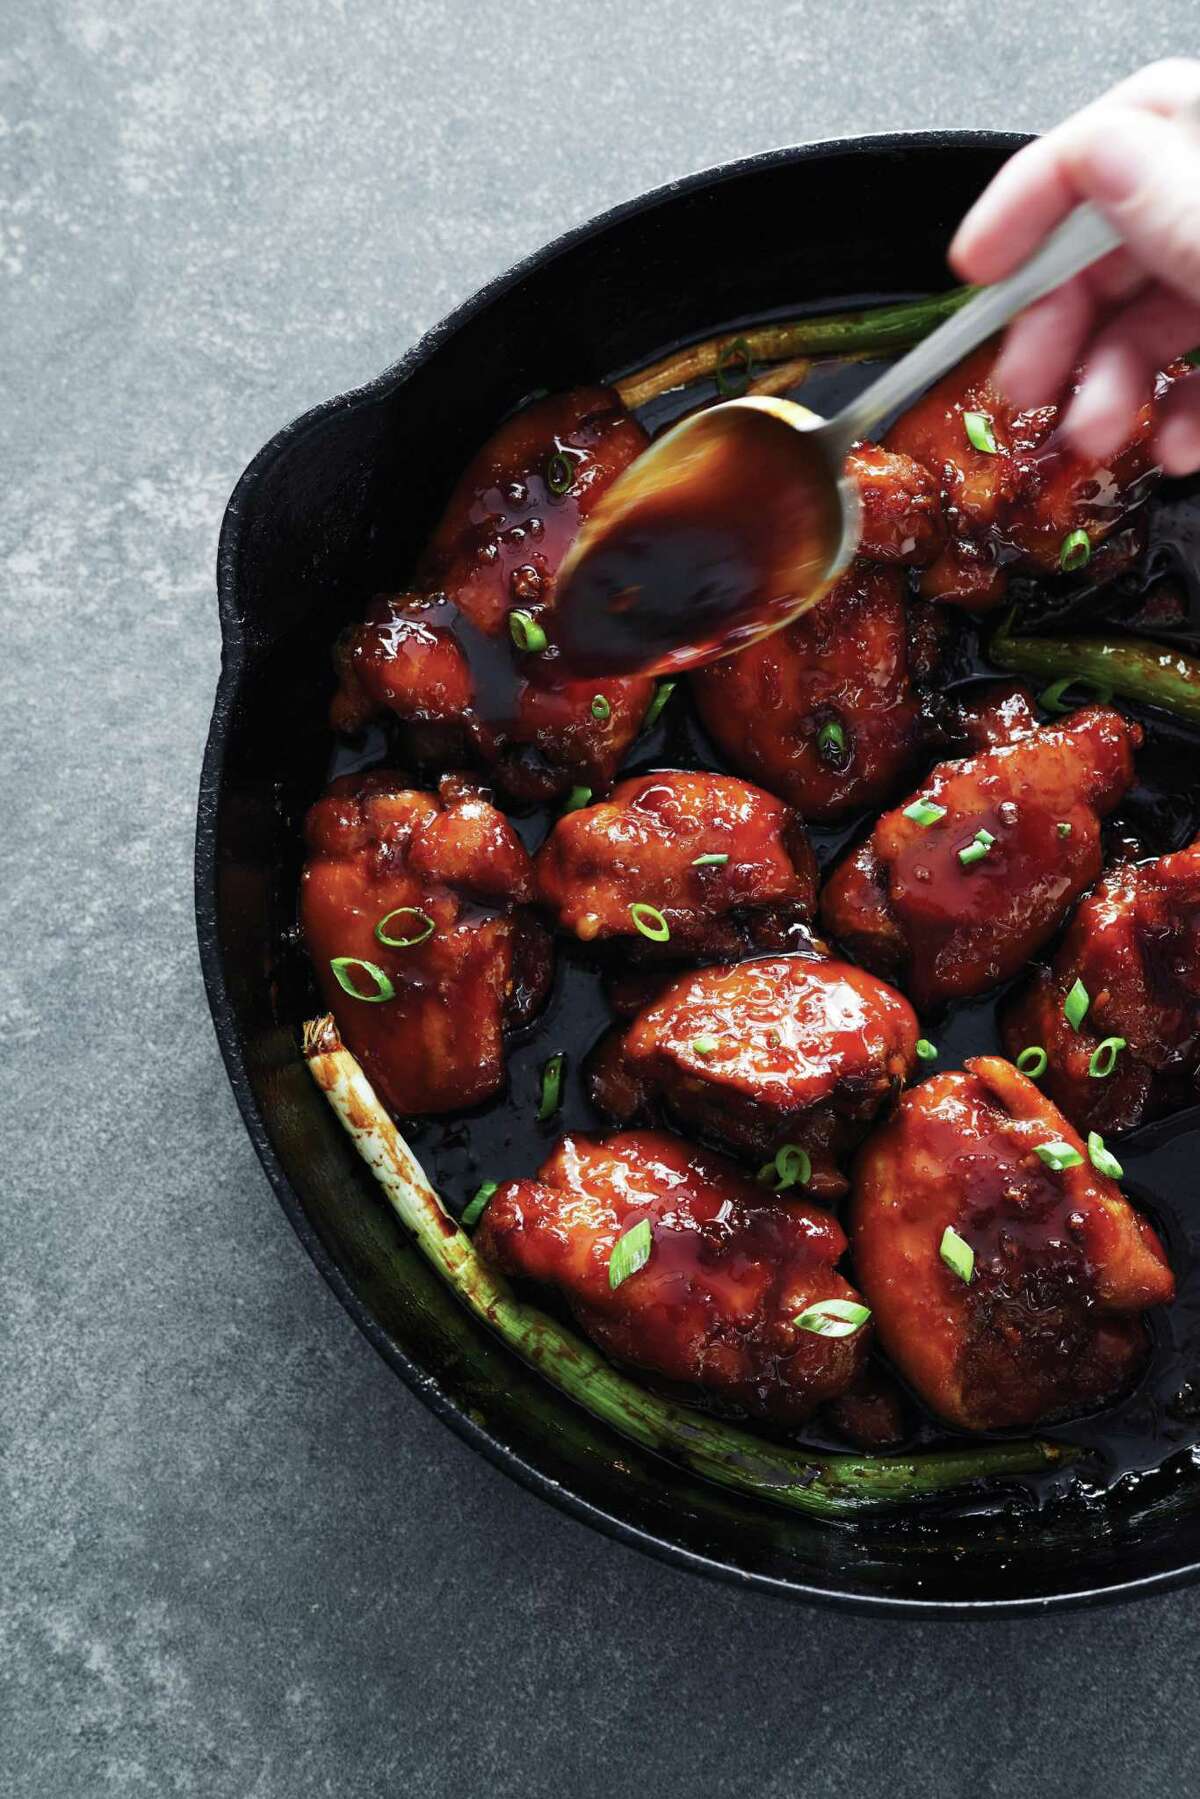 Sticky Chicken Thighs with Ginger and Garlic from "Skillet Love," a cookbook on cast-iron pan cooking by Ann Byrn.